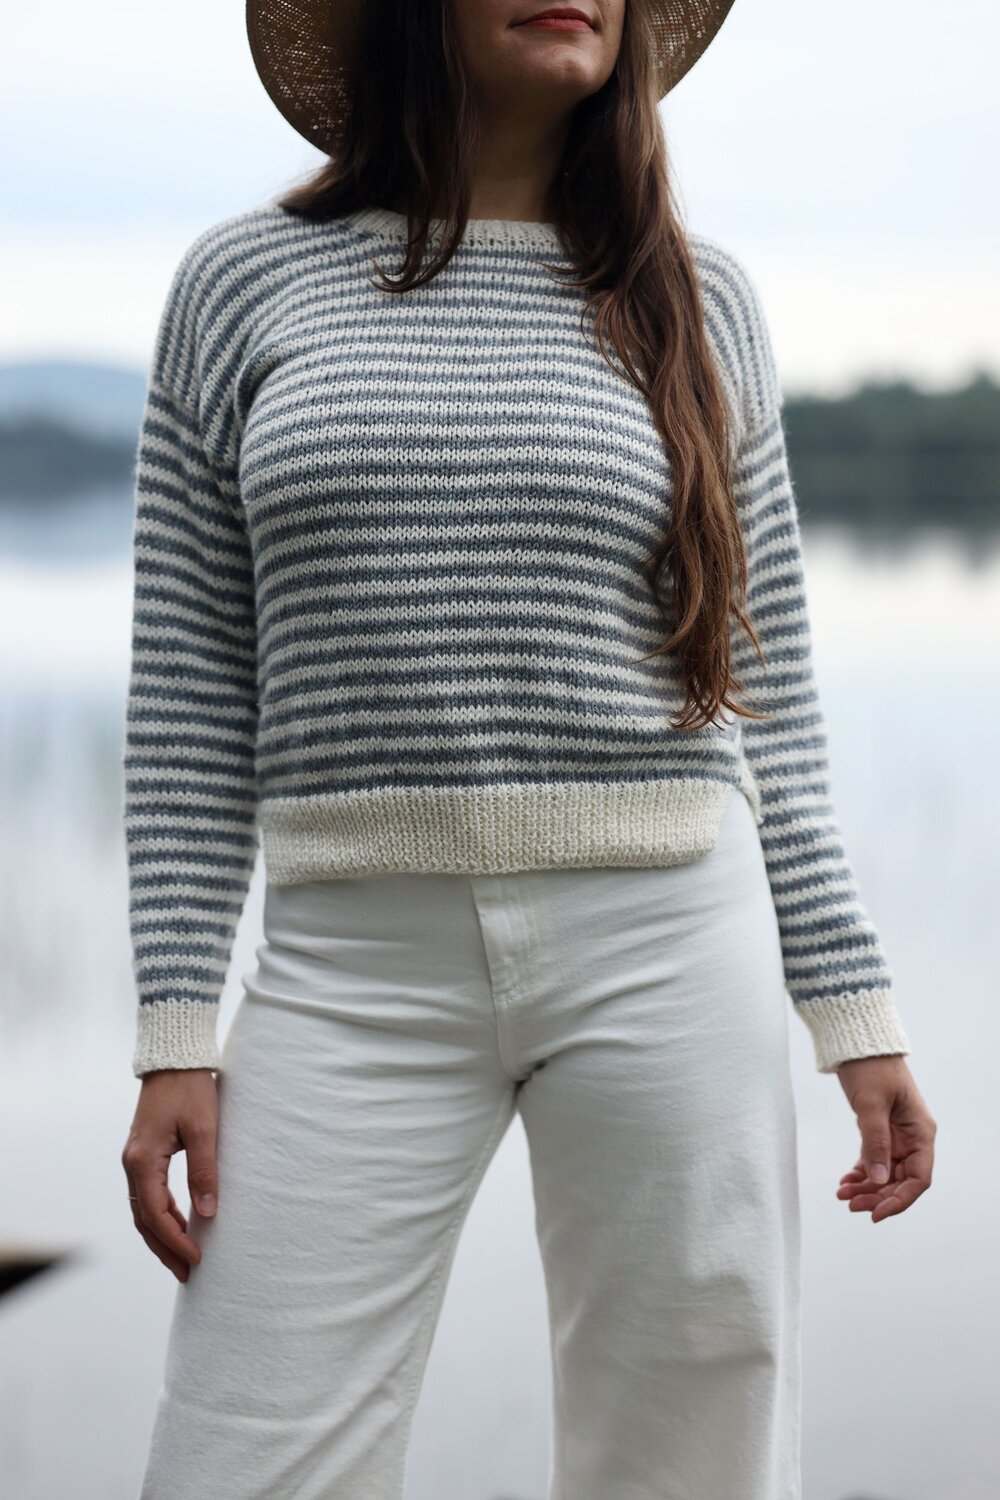 Le Bateau Sweater Pattern by Two of Wands